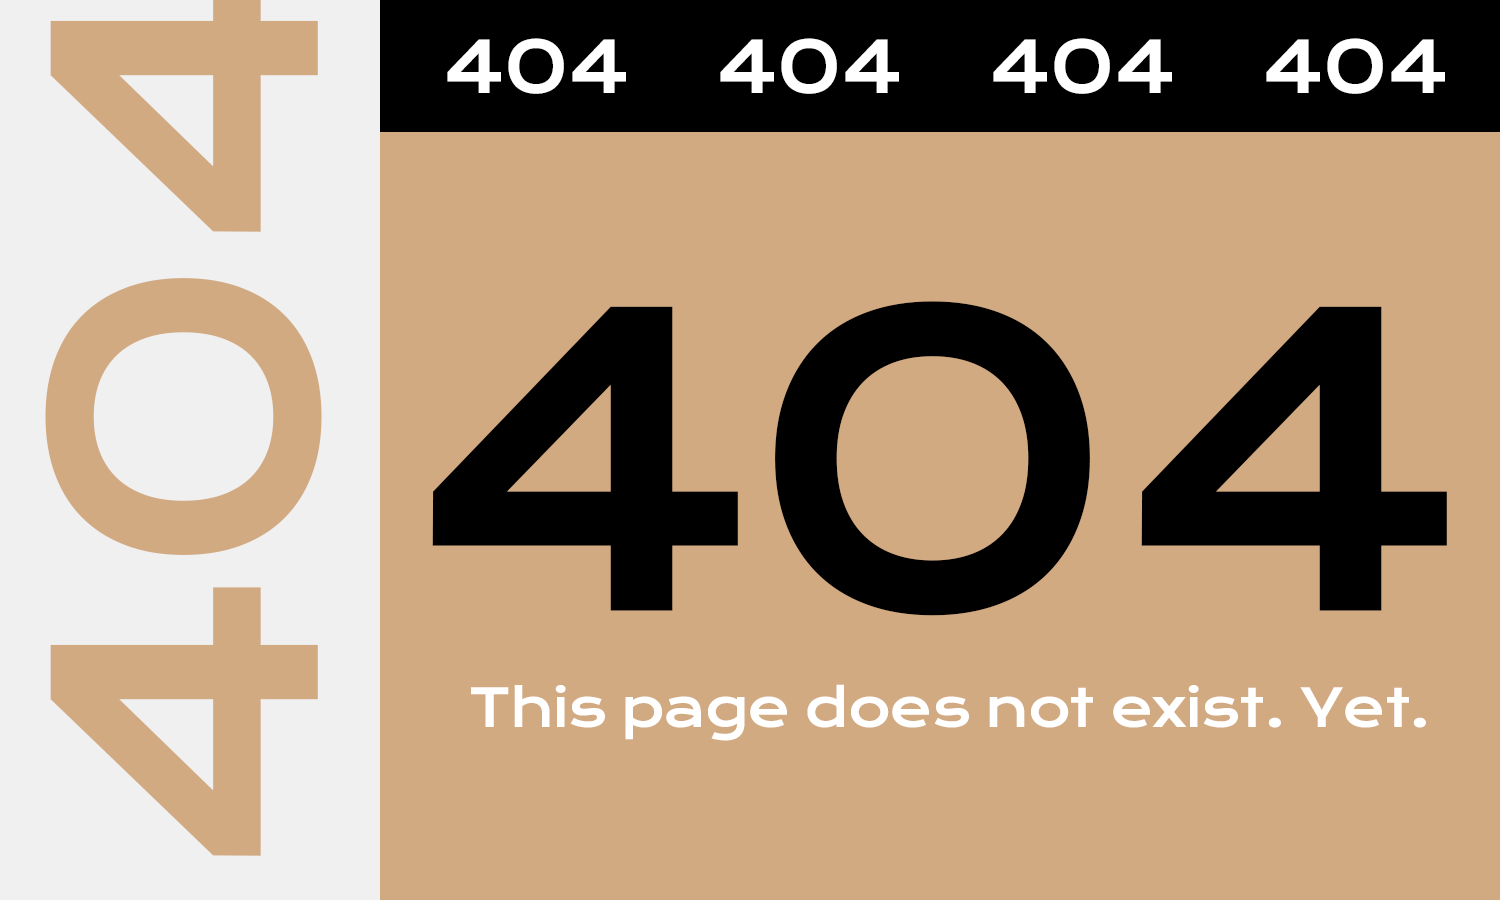 404. Sorry, this page does not exist.